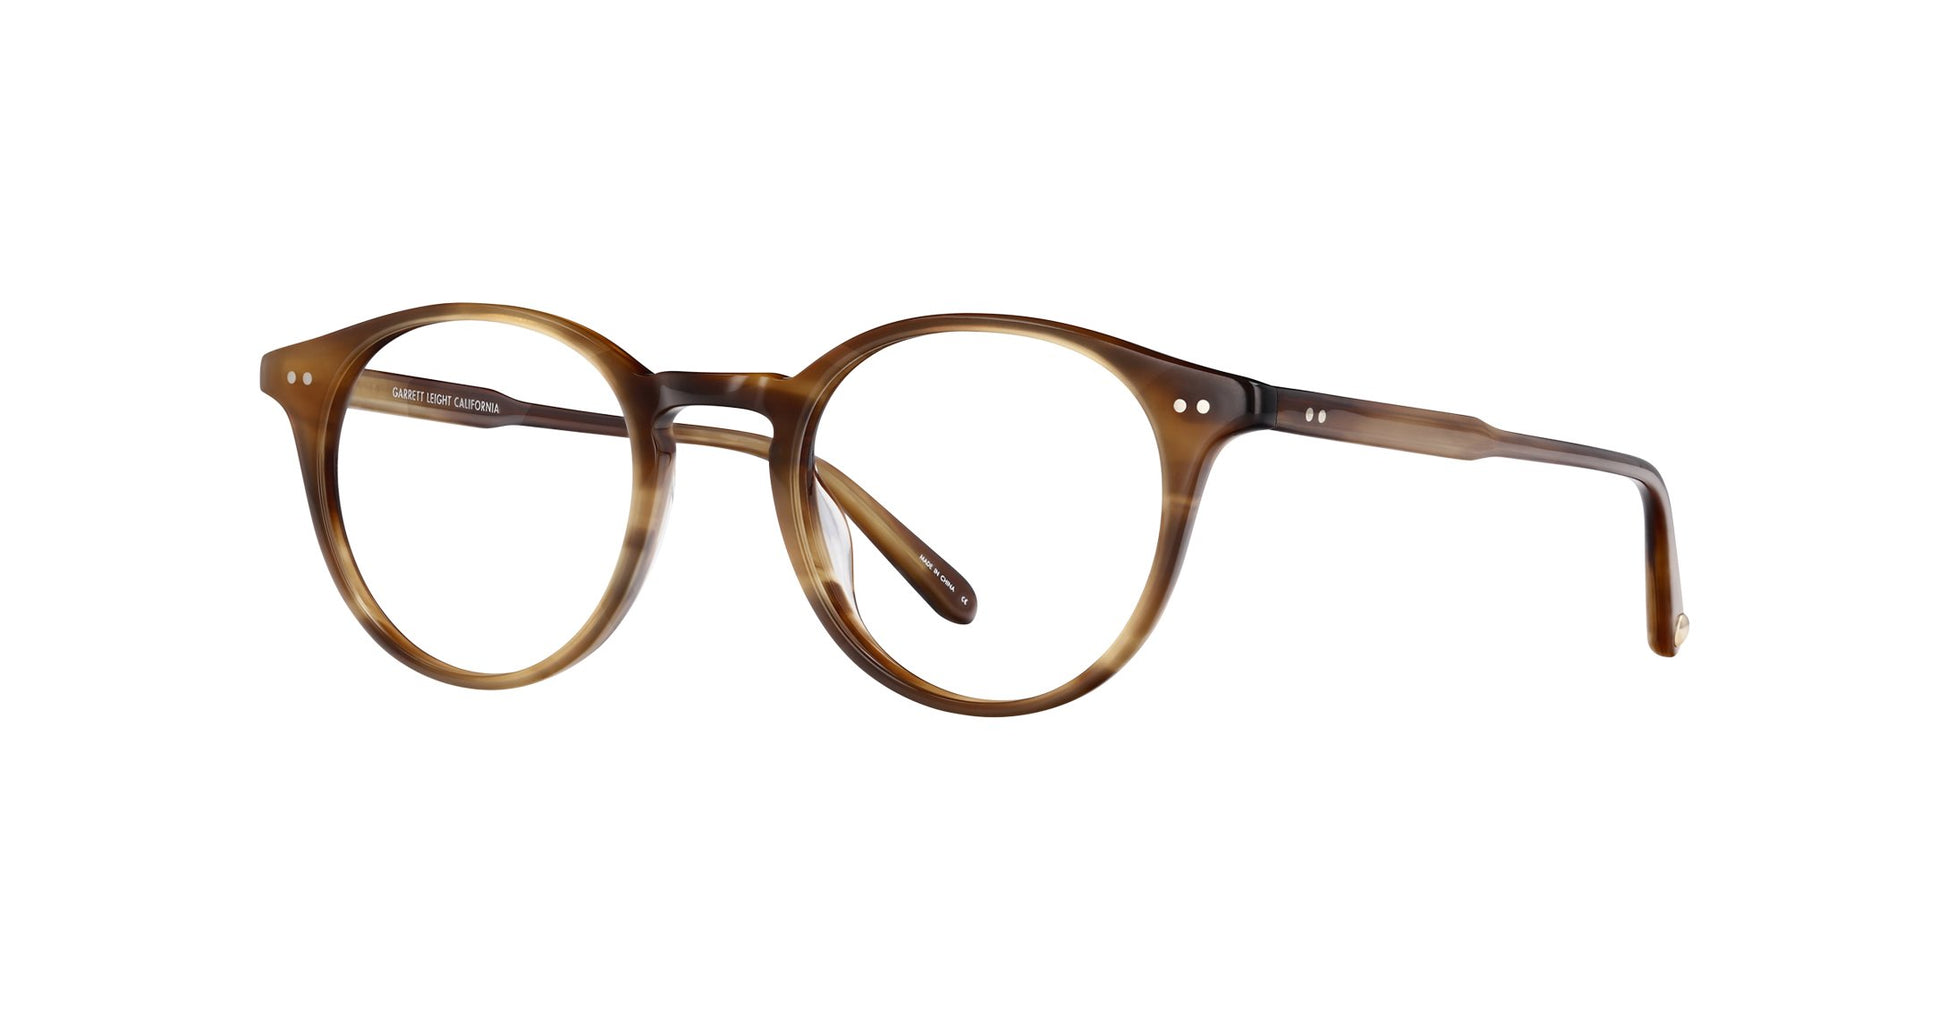 Inspired by the mid-century, Clune True Demi is a modern take on the classic P3 eyeglass silhouette, with a distinctive round shape and lightweight acetate construction. Hand Finished in LA. Now Available in Toronto, Canada.